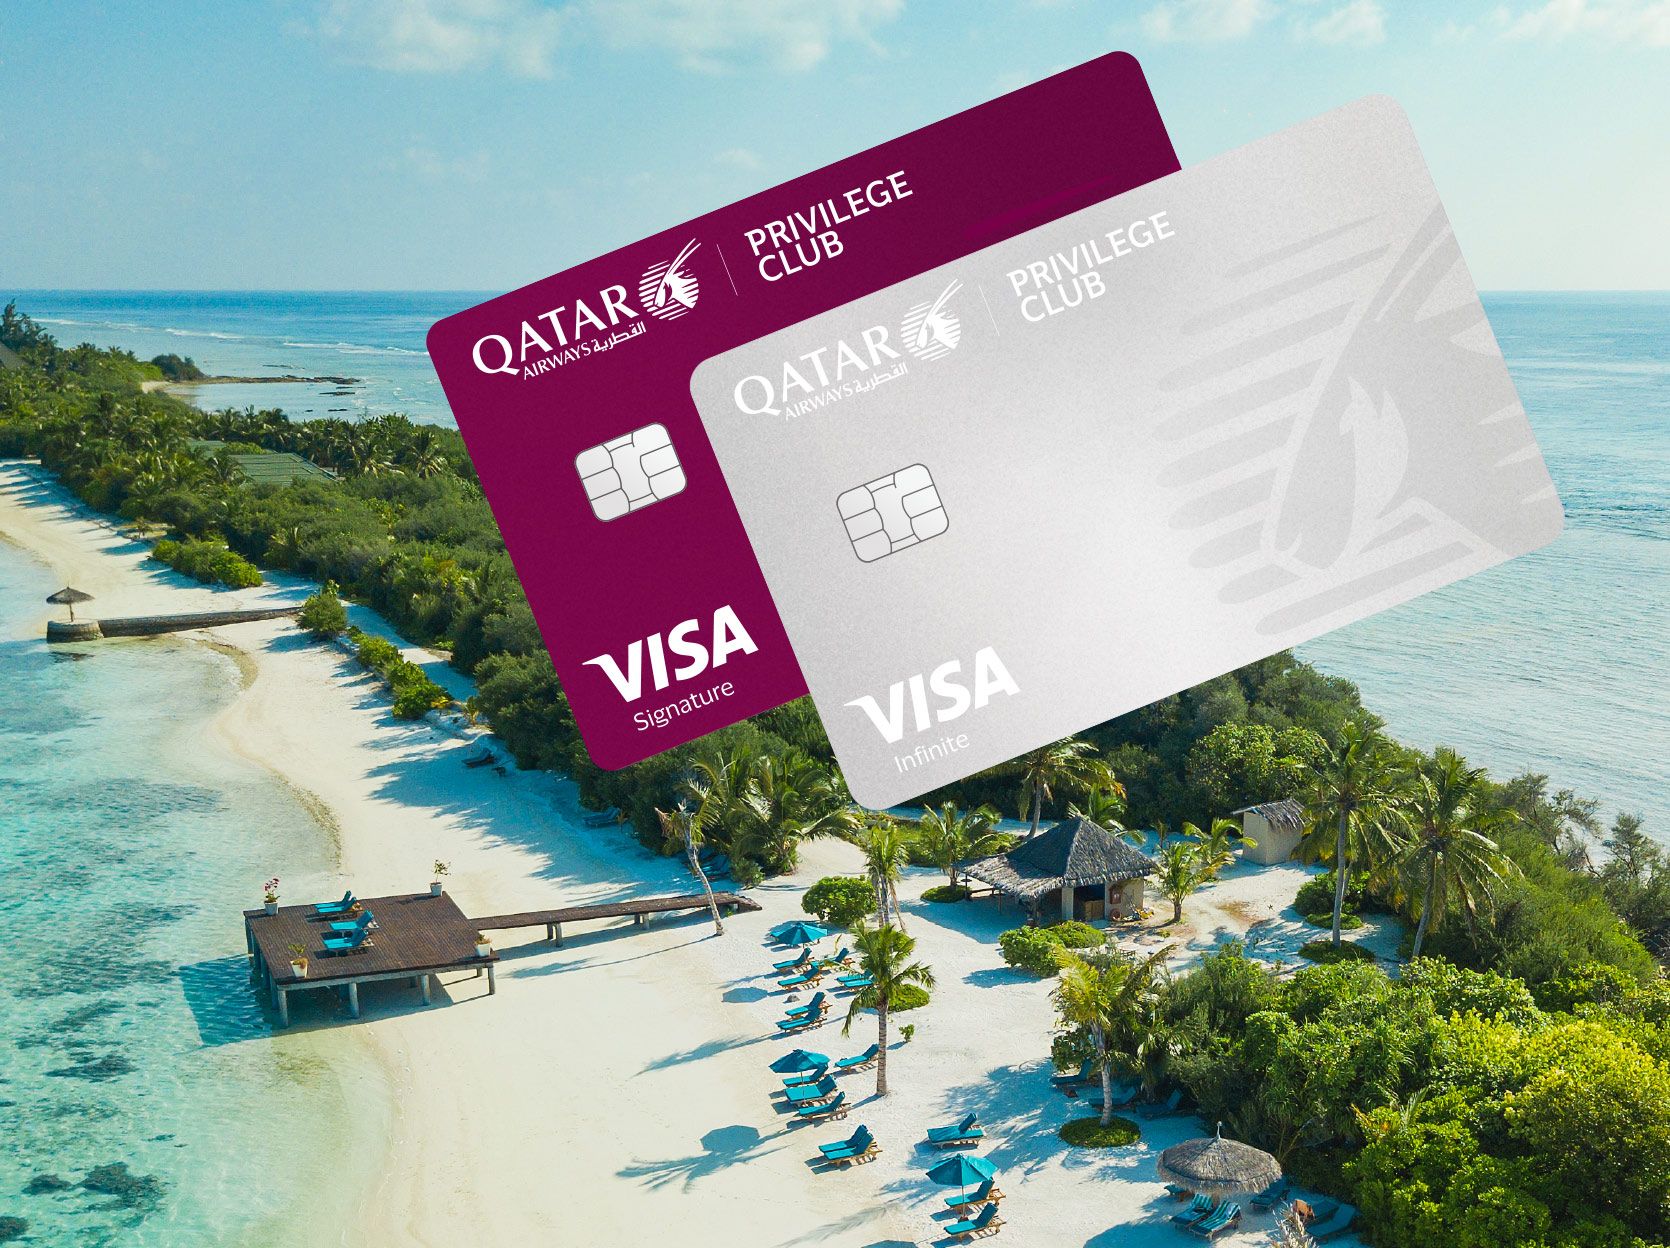 The two new Visa Qatar Airways cards